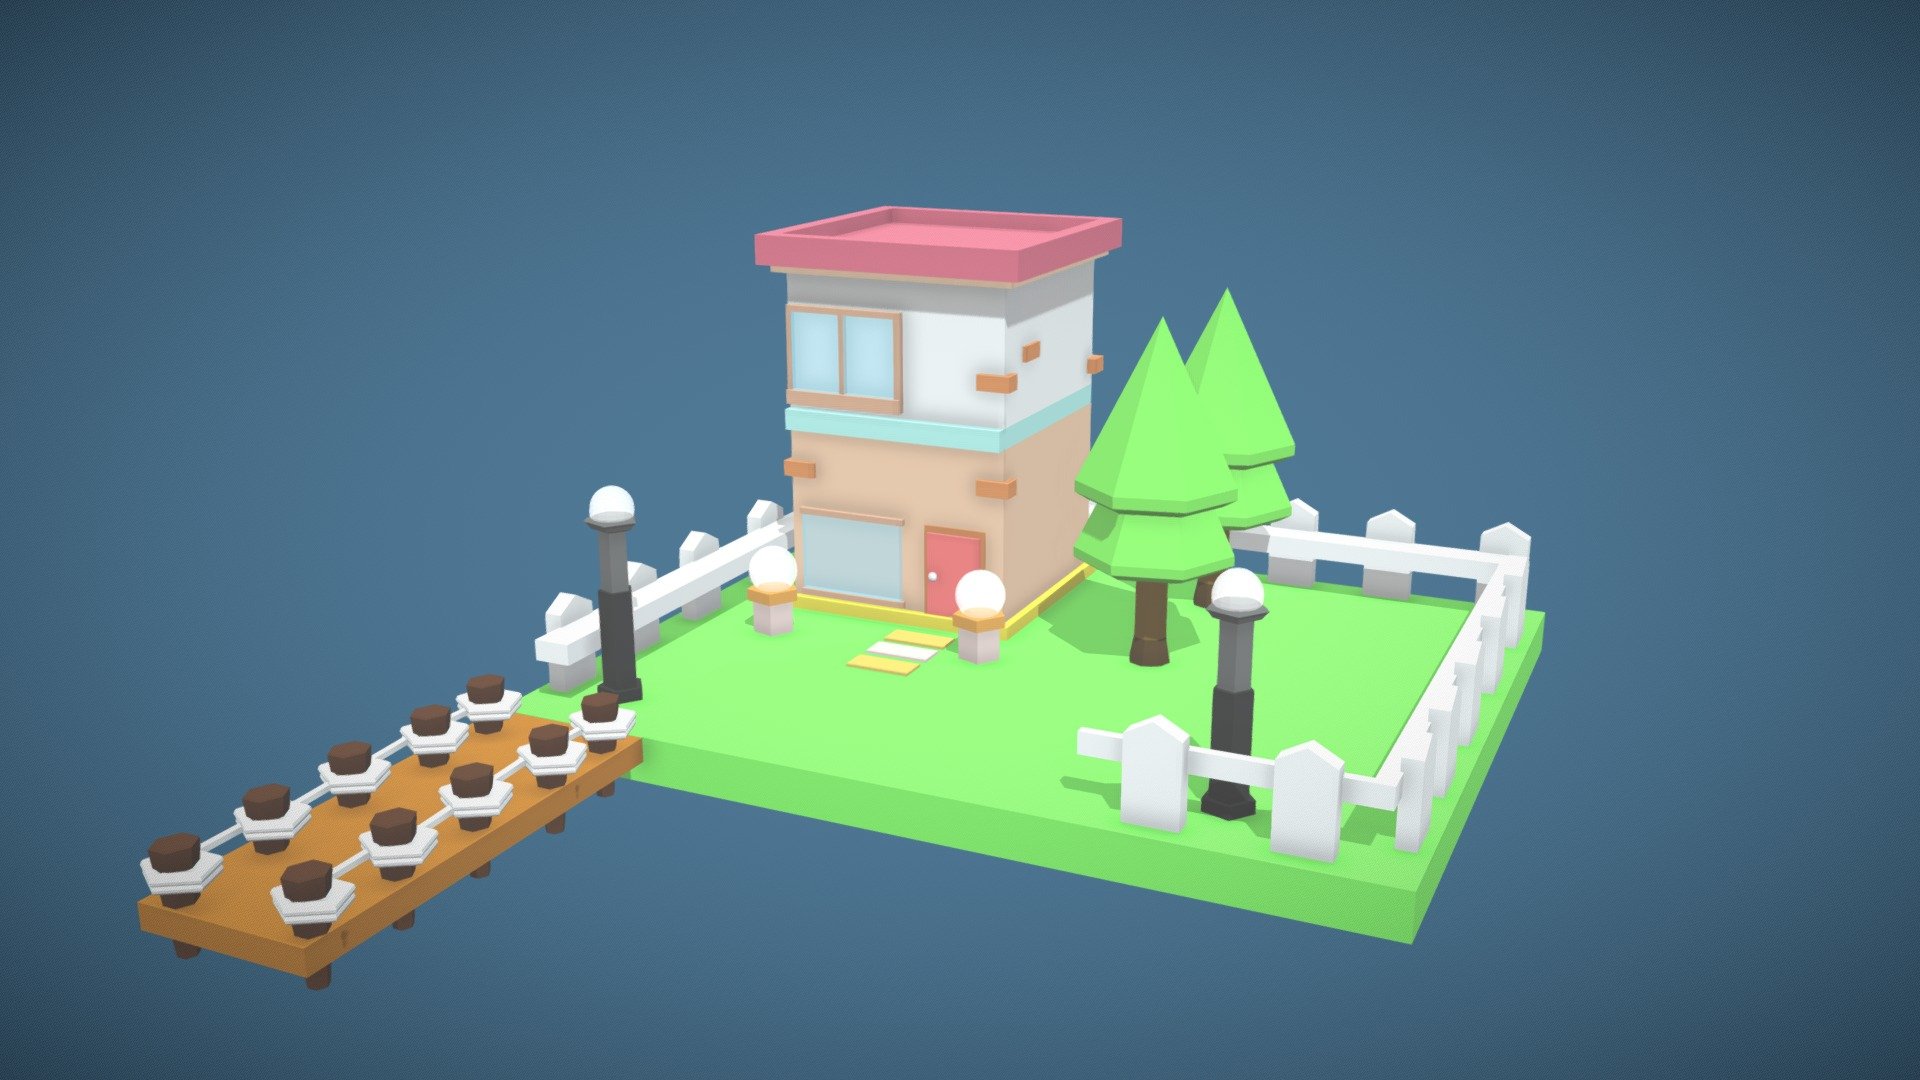 simple low poly building ,
assets were inspired .

*made slight amendment to the assets

tutorials/videos:https://youtu.be/A6Xe4XJoyxM - low poly house - Download Free 3D model by cofitelle 3d model